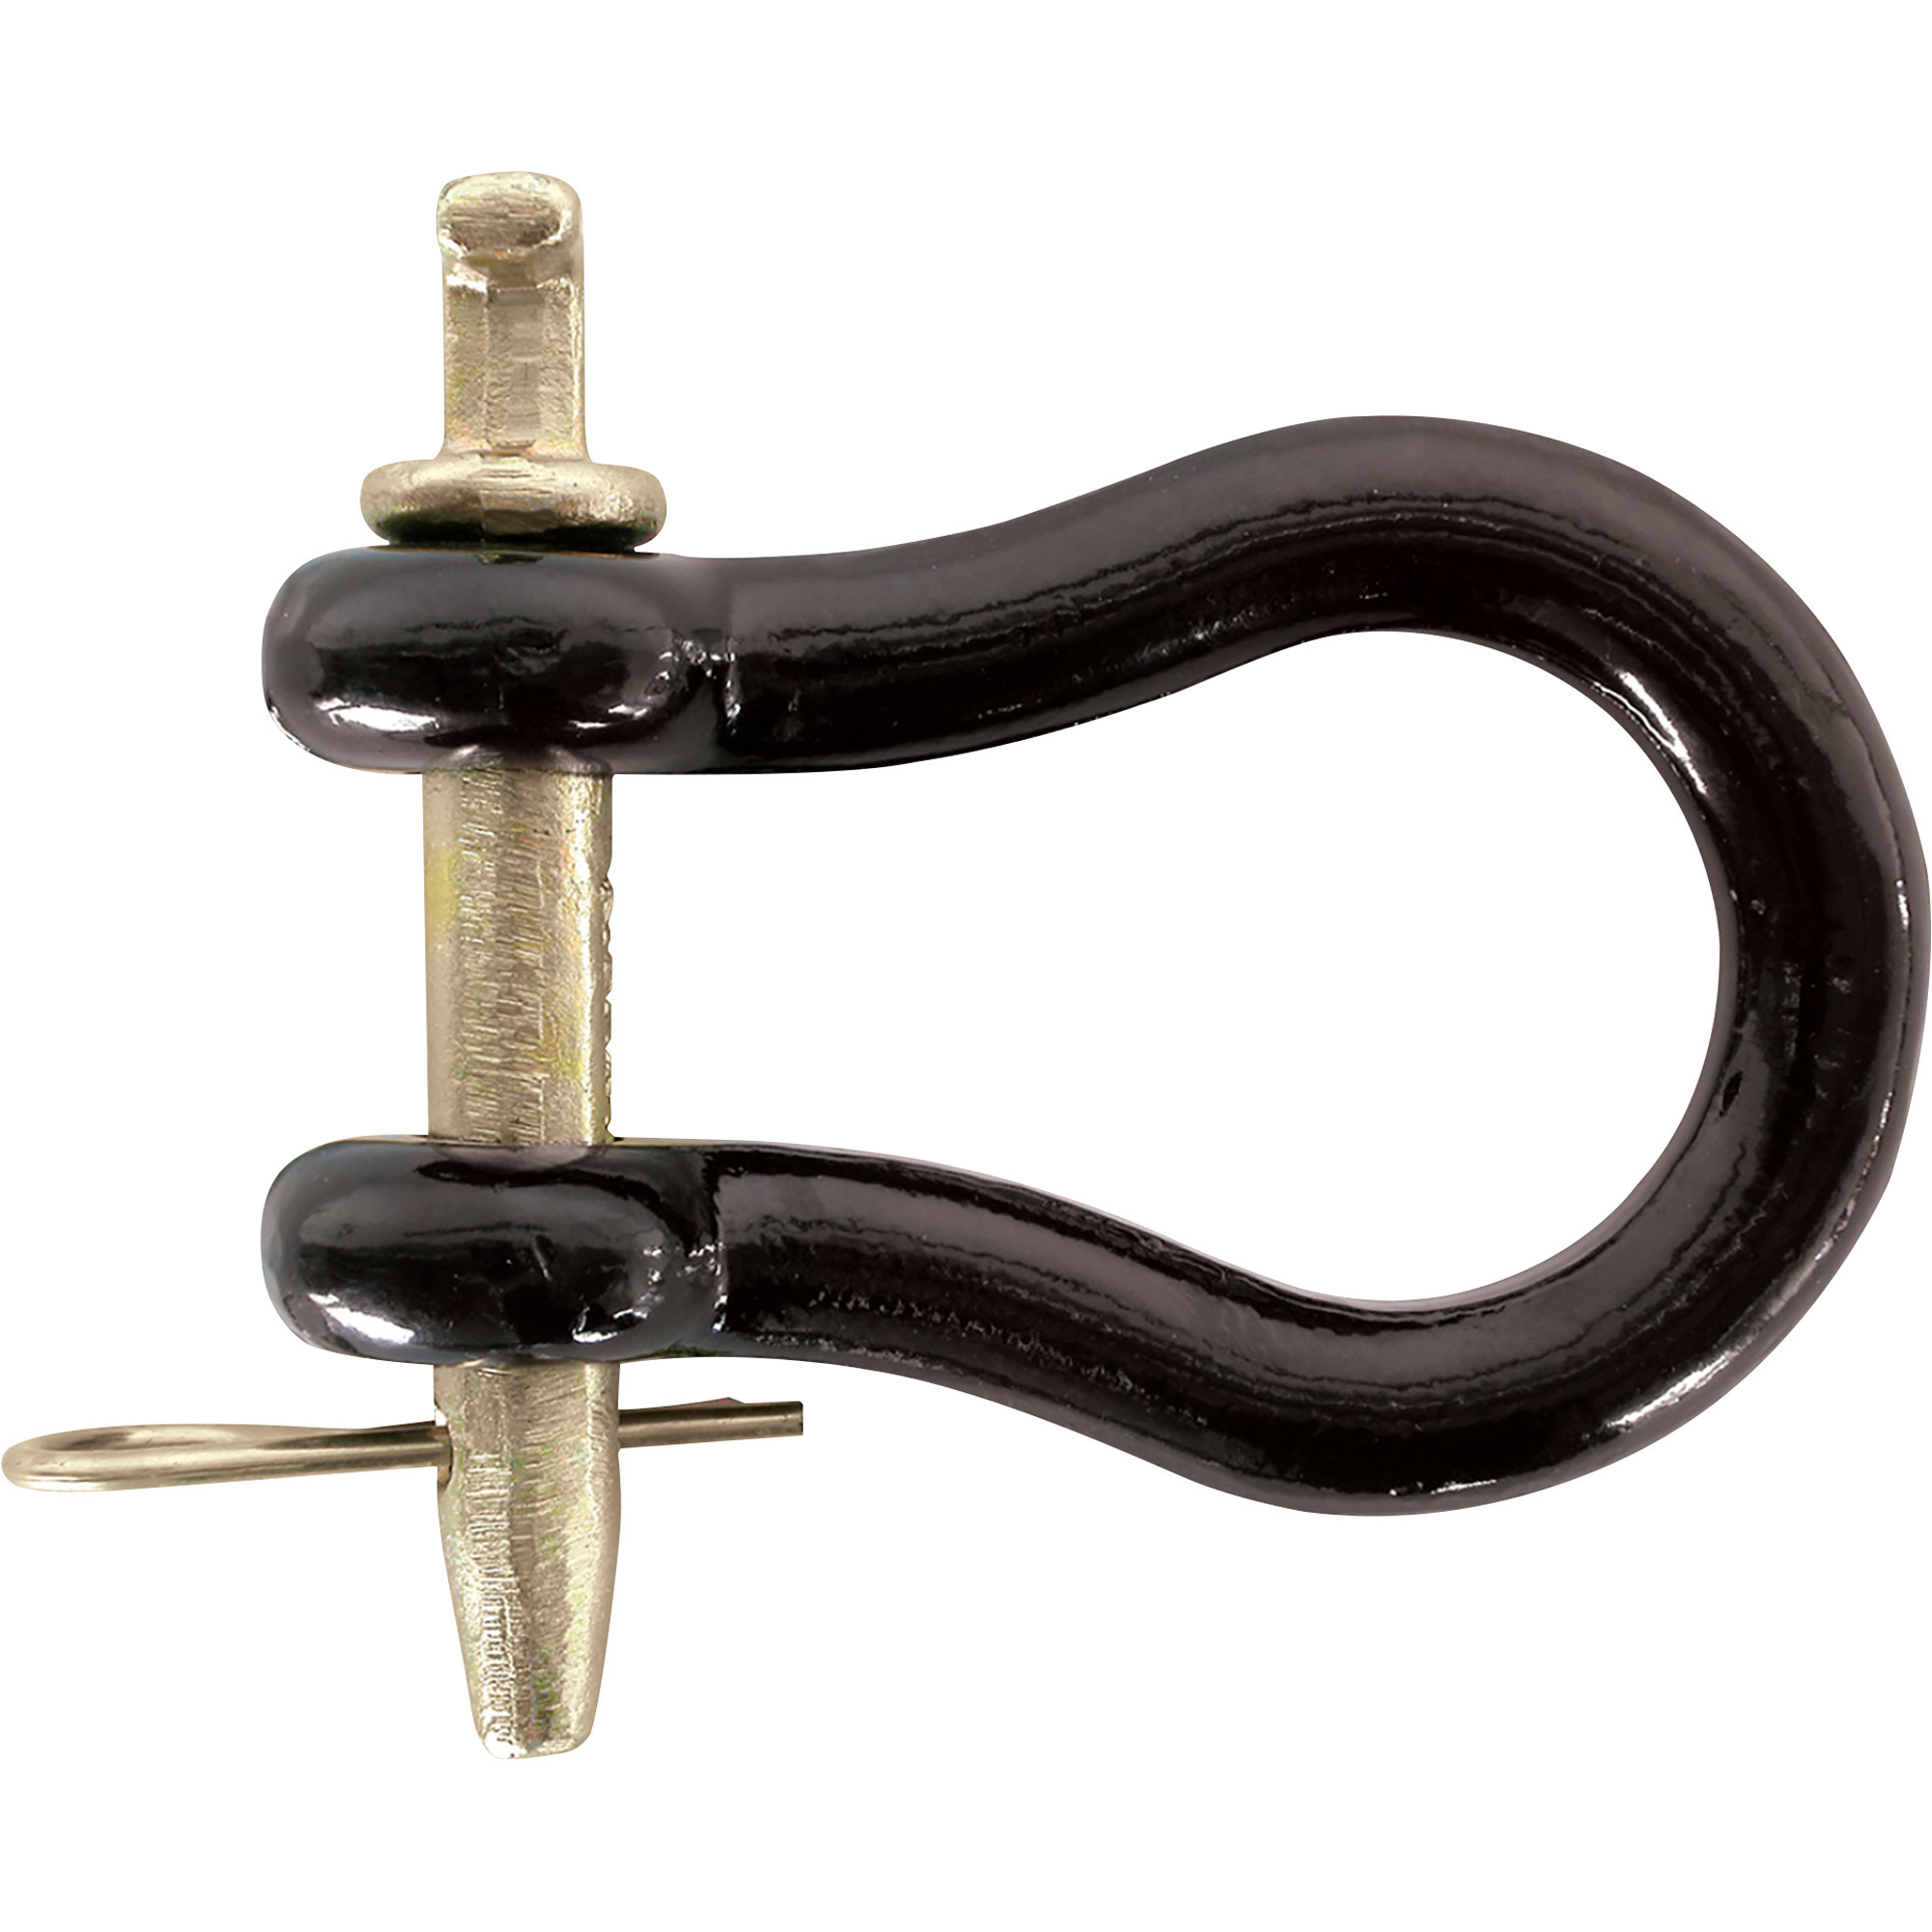 Braber Equipment Straight Clevis, 1Inch x 5 5/16Inch, Model 64.300.001